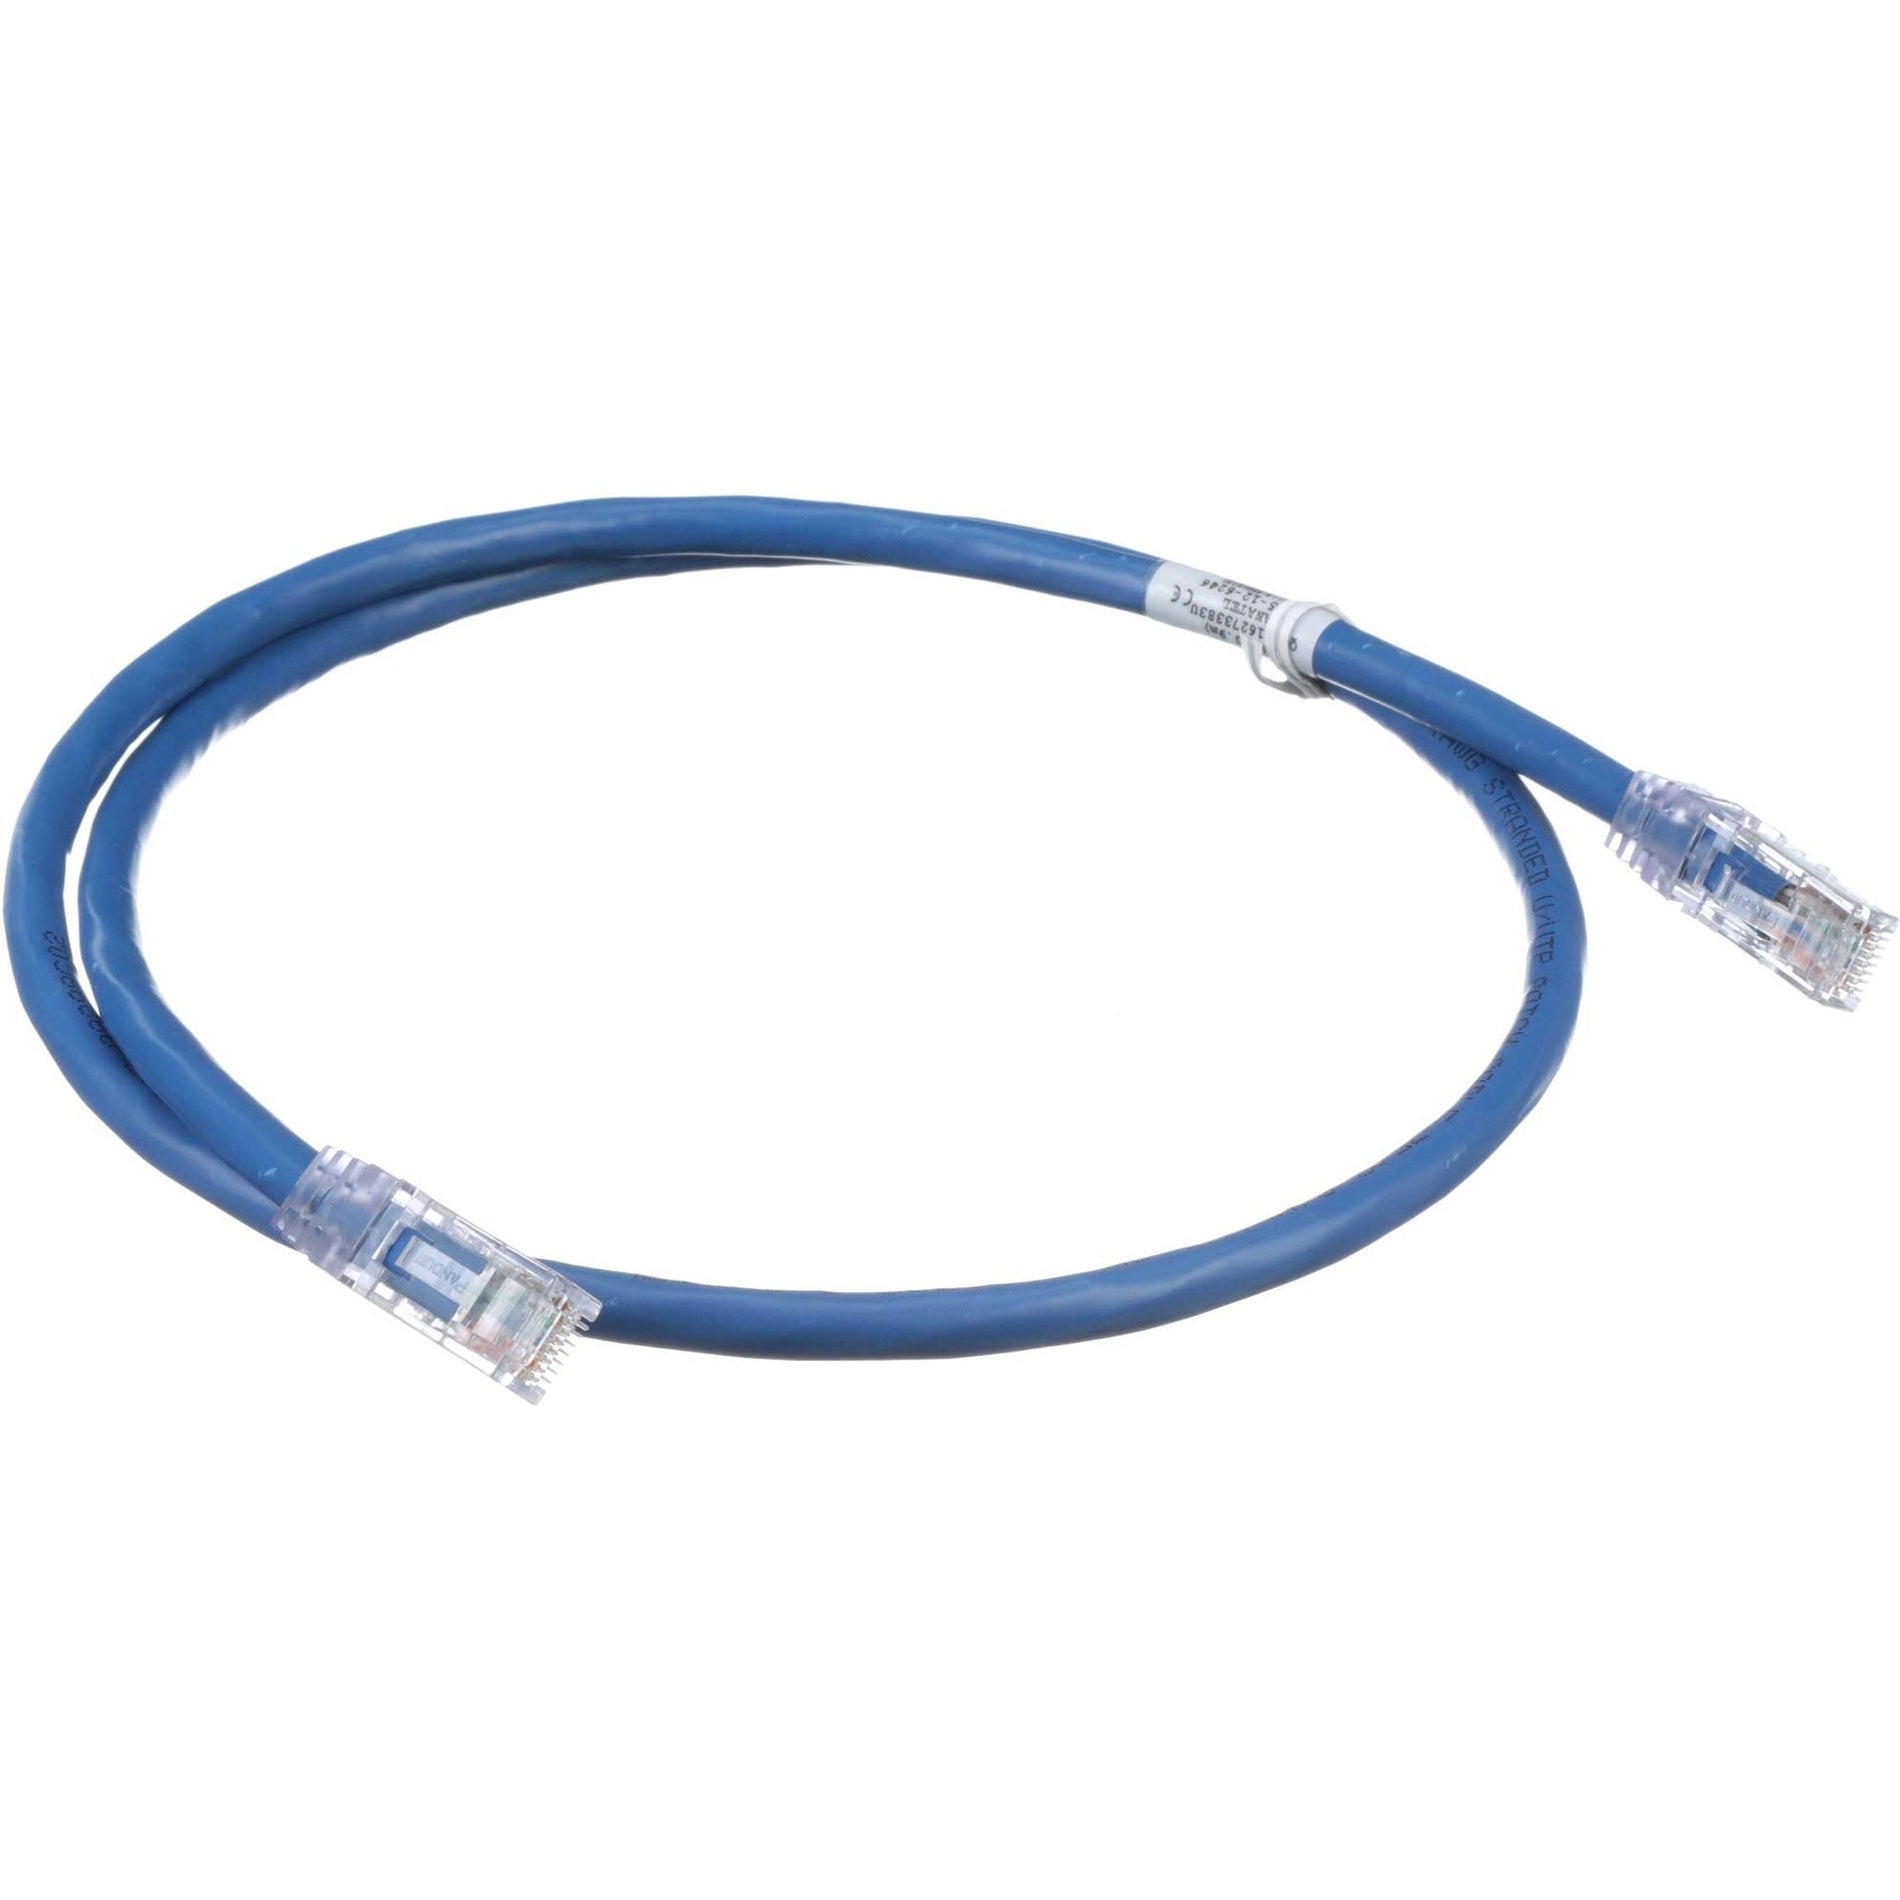 Panduit UTP6AX1 Cat 6A 24 AWG UTP Copper Patch Cord, 1 ft, White, Snag Resistant, Tangle-free, 10 Gbit/s Data Transfer Rate